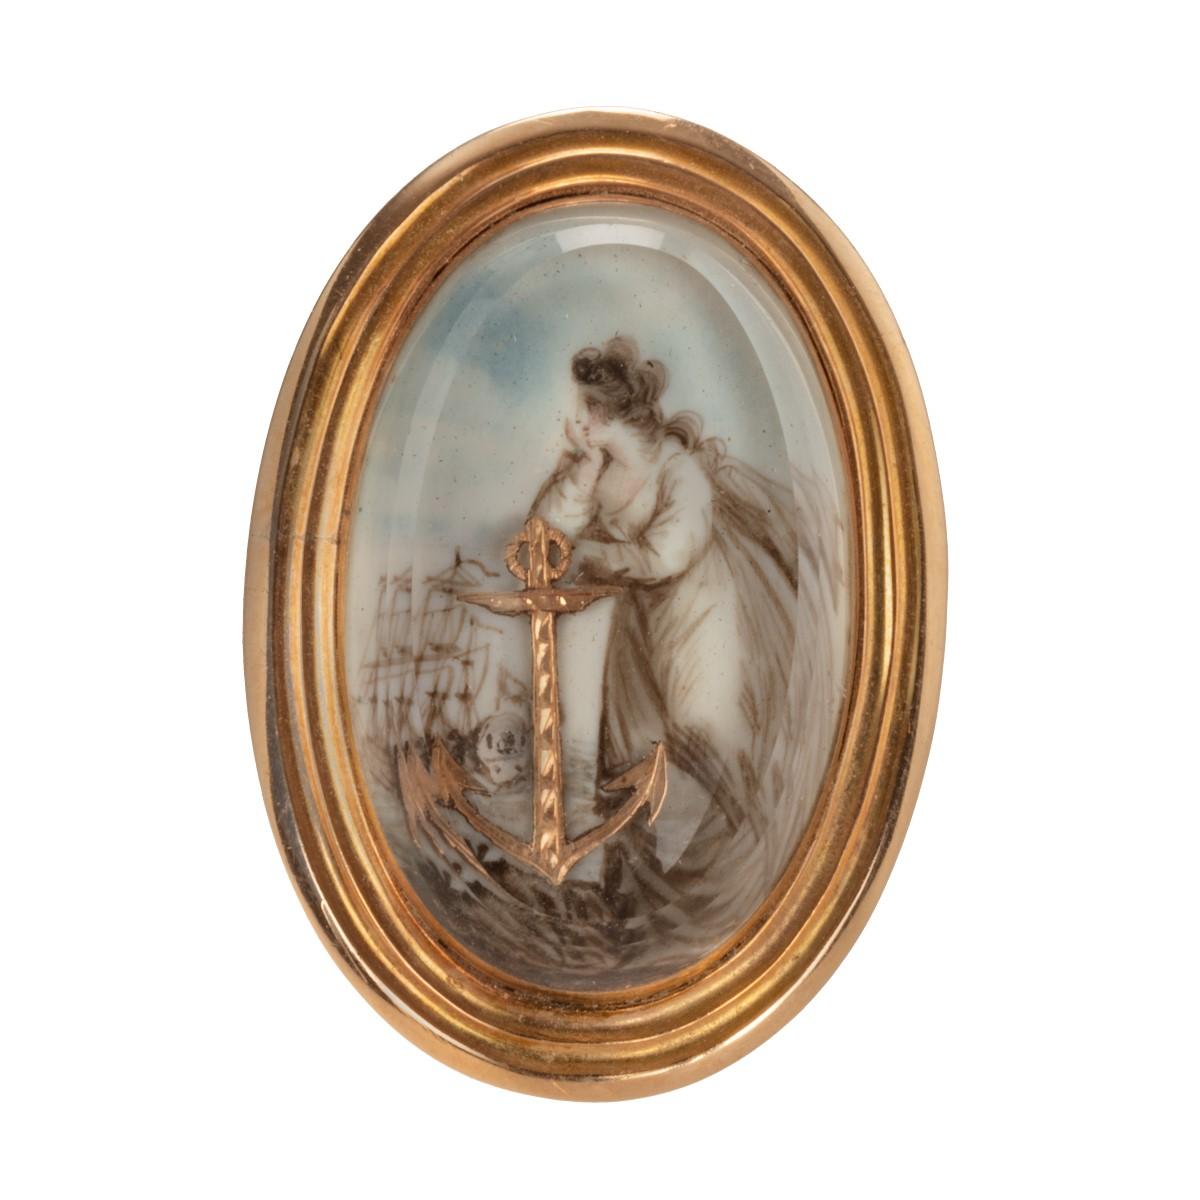 A large George III glazed gold, enamel and ivory ring representing the figure of Hope with her anchor, gazing out to sea and a squadron of warships.
English, circa 1800

Usually portrayed with her anchor attribute, the figure of Hope, one of the